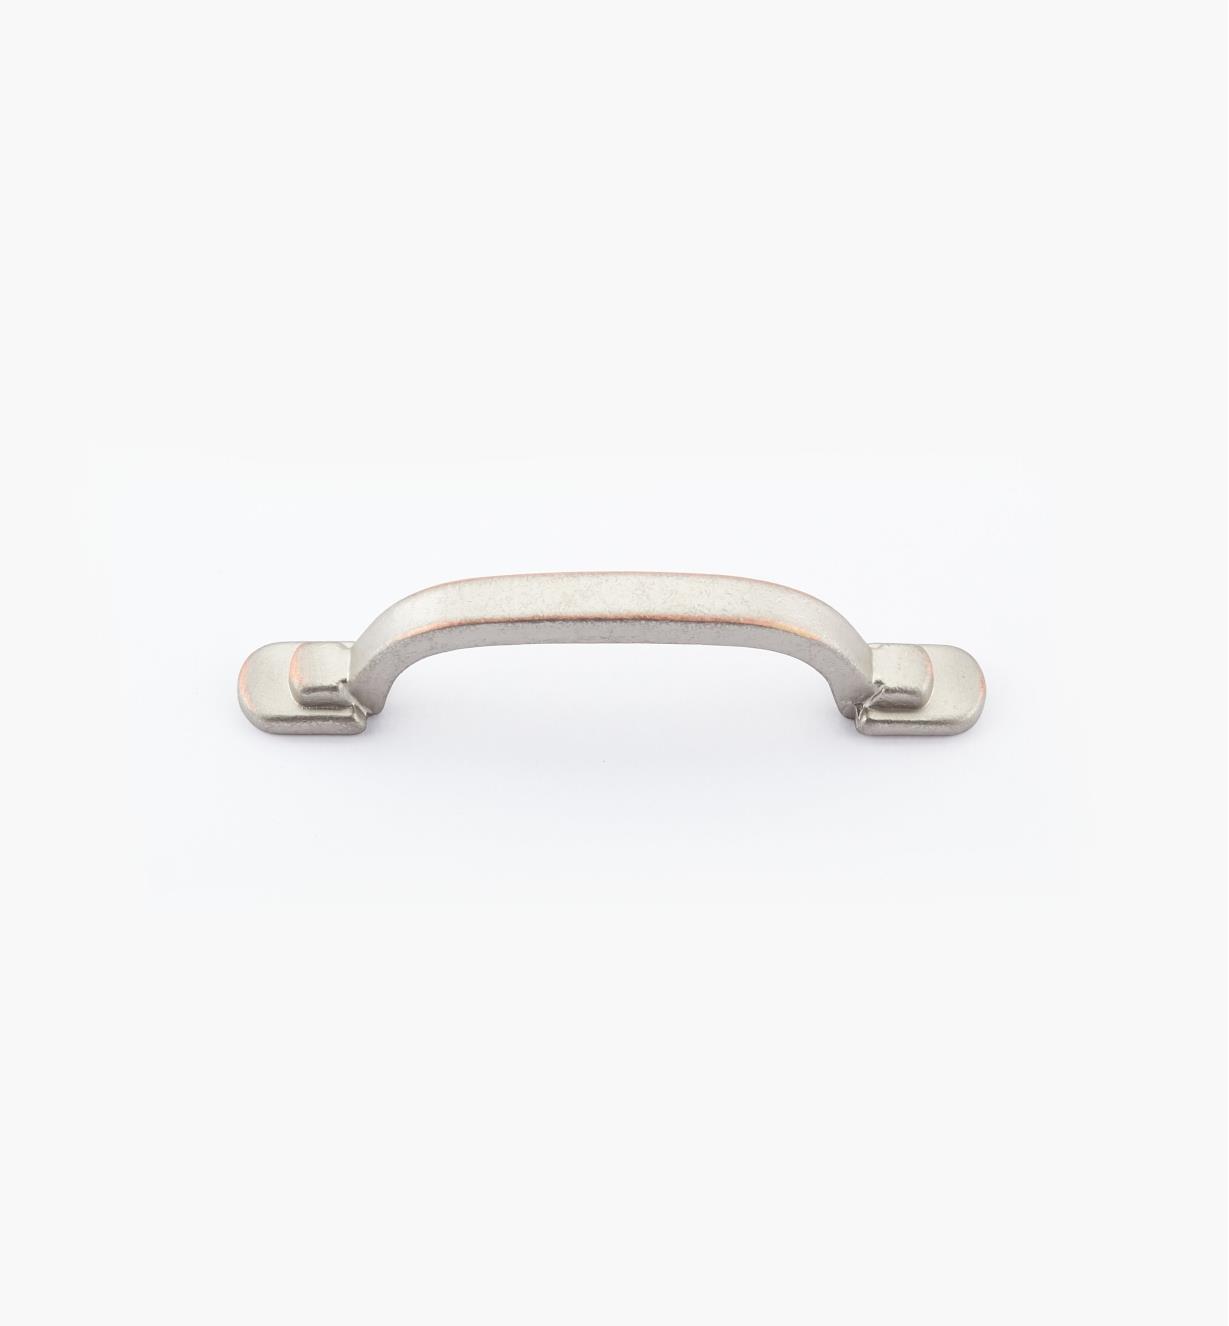 02W1847 - 4 1/8" Weathered Nickel-Copper Handle (3")